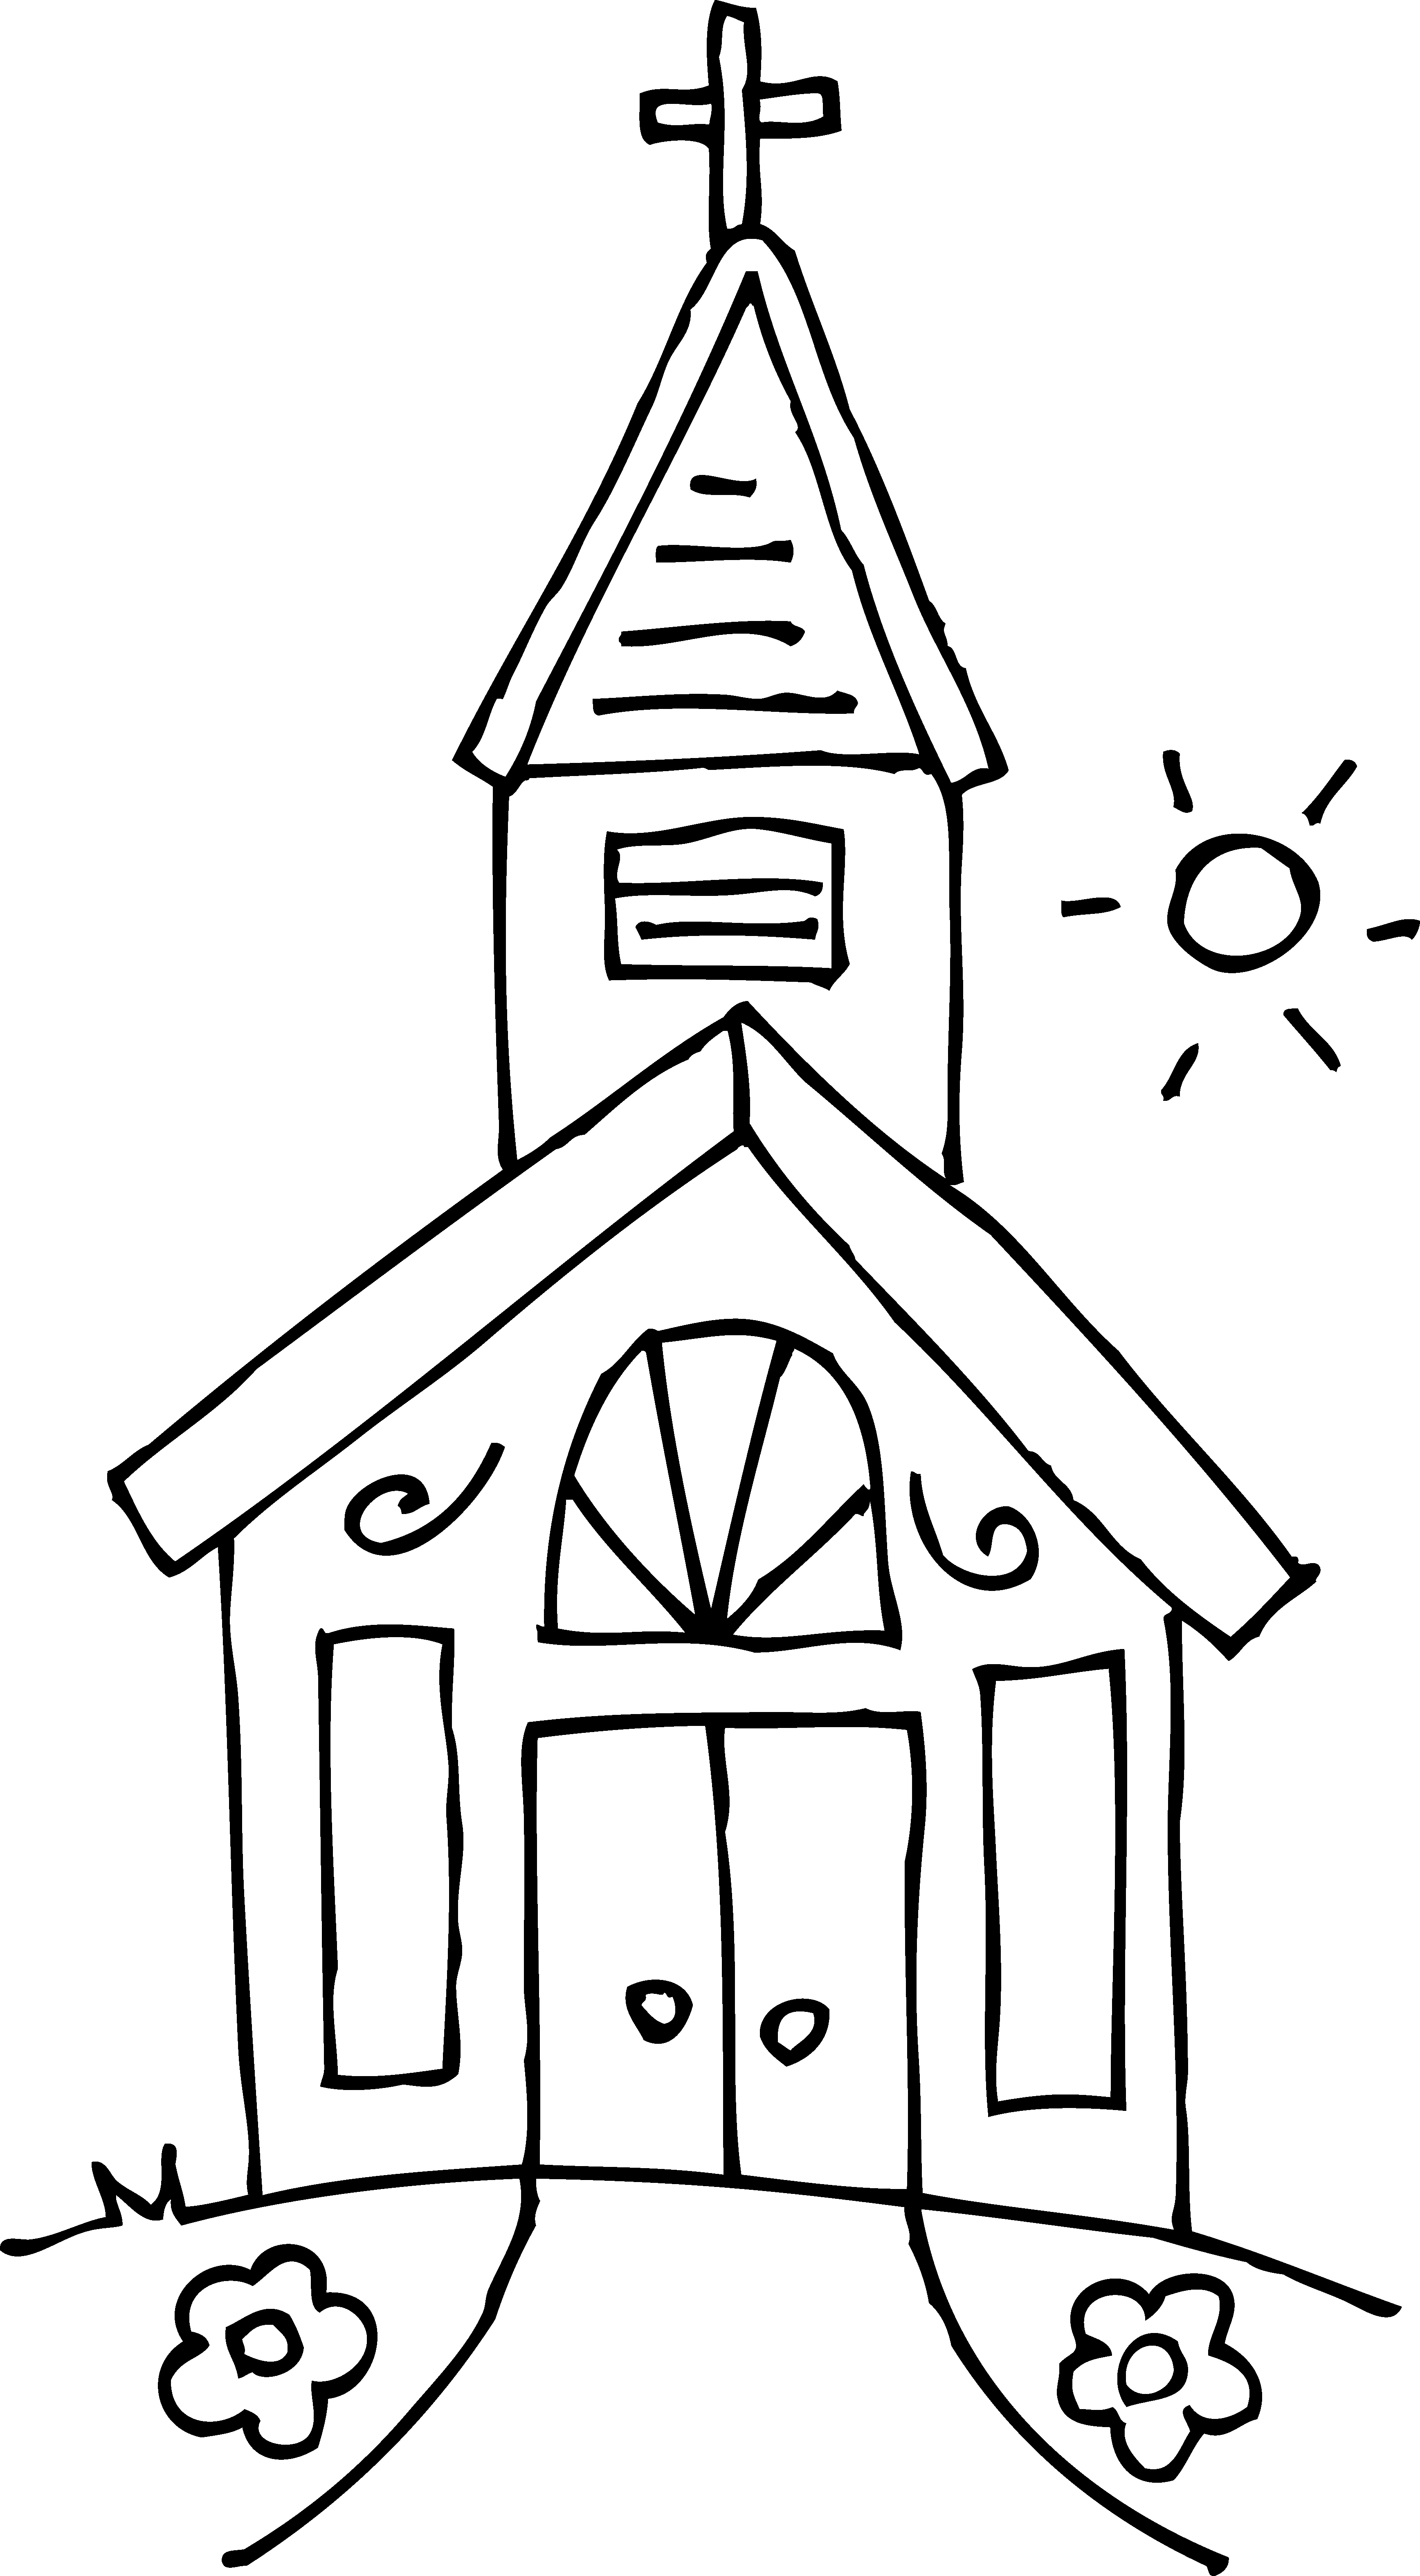 Download Catholic Church Coloring Pages - Coloring Home